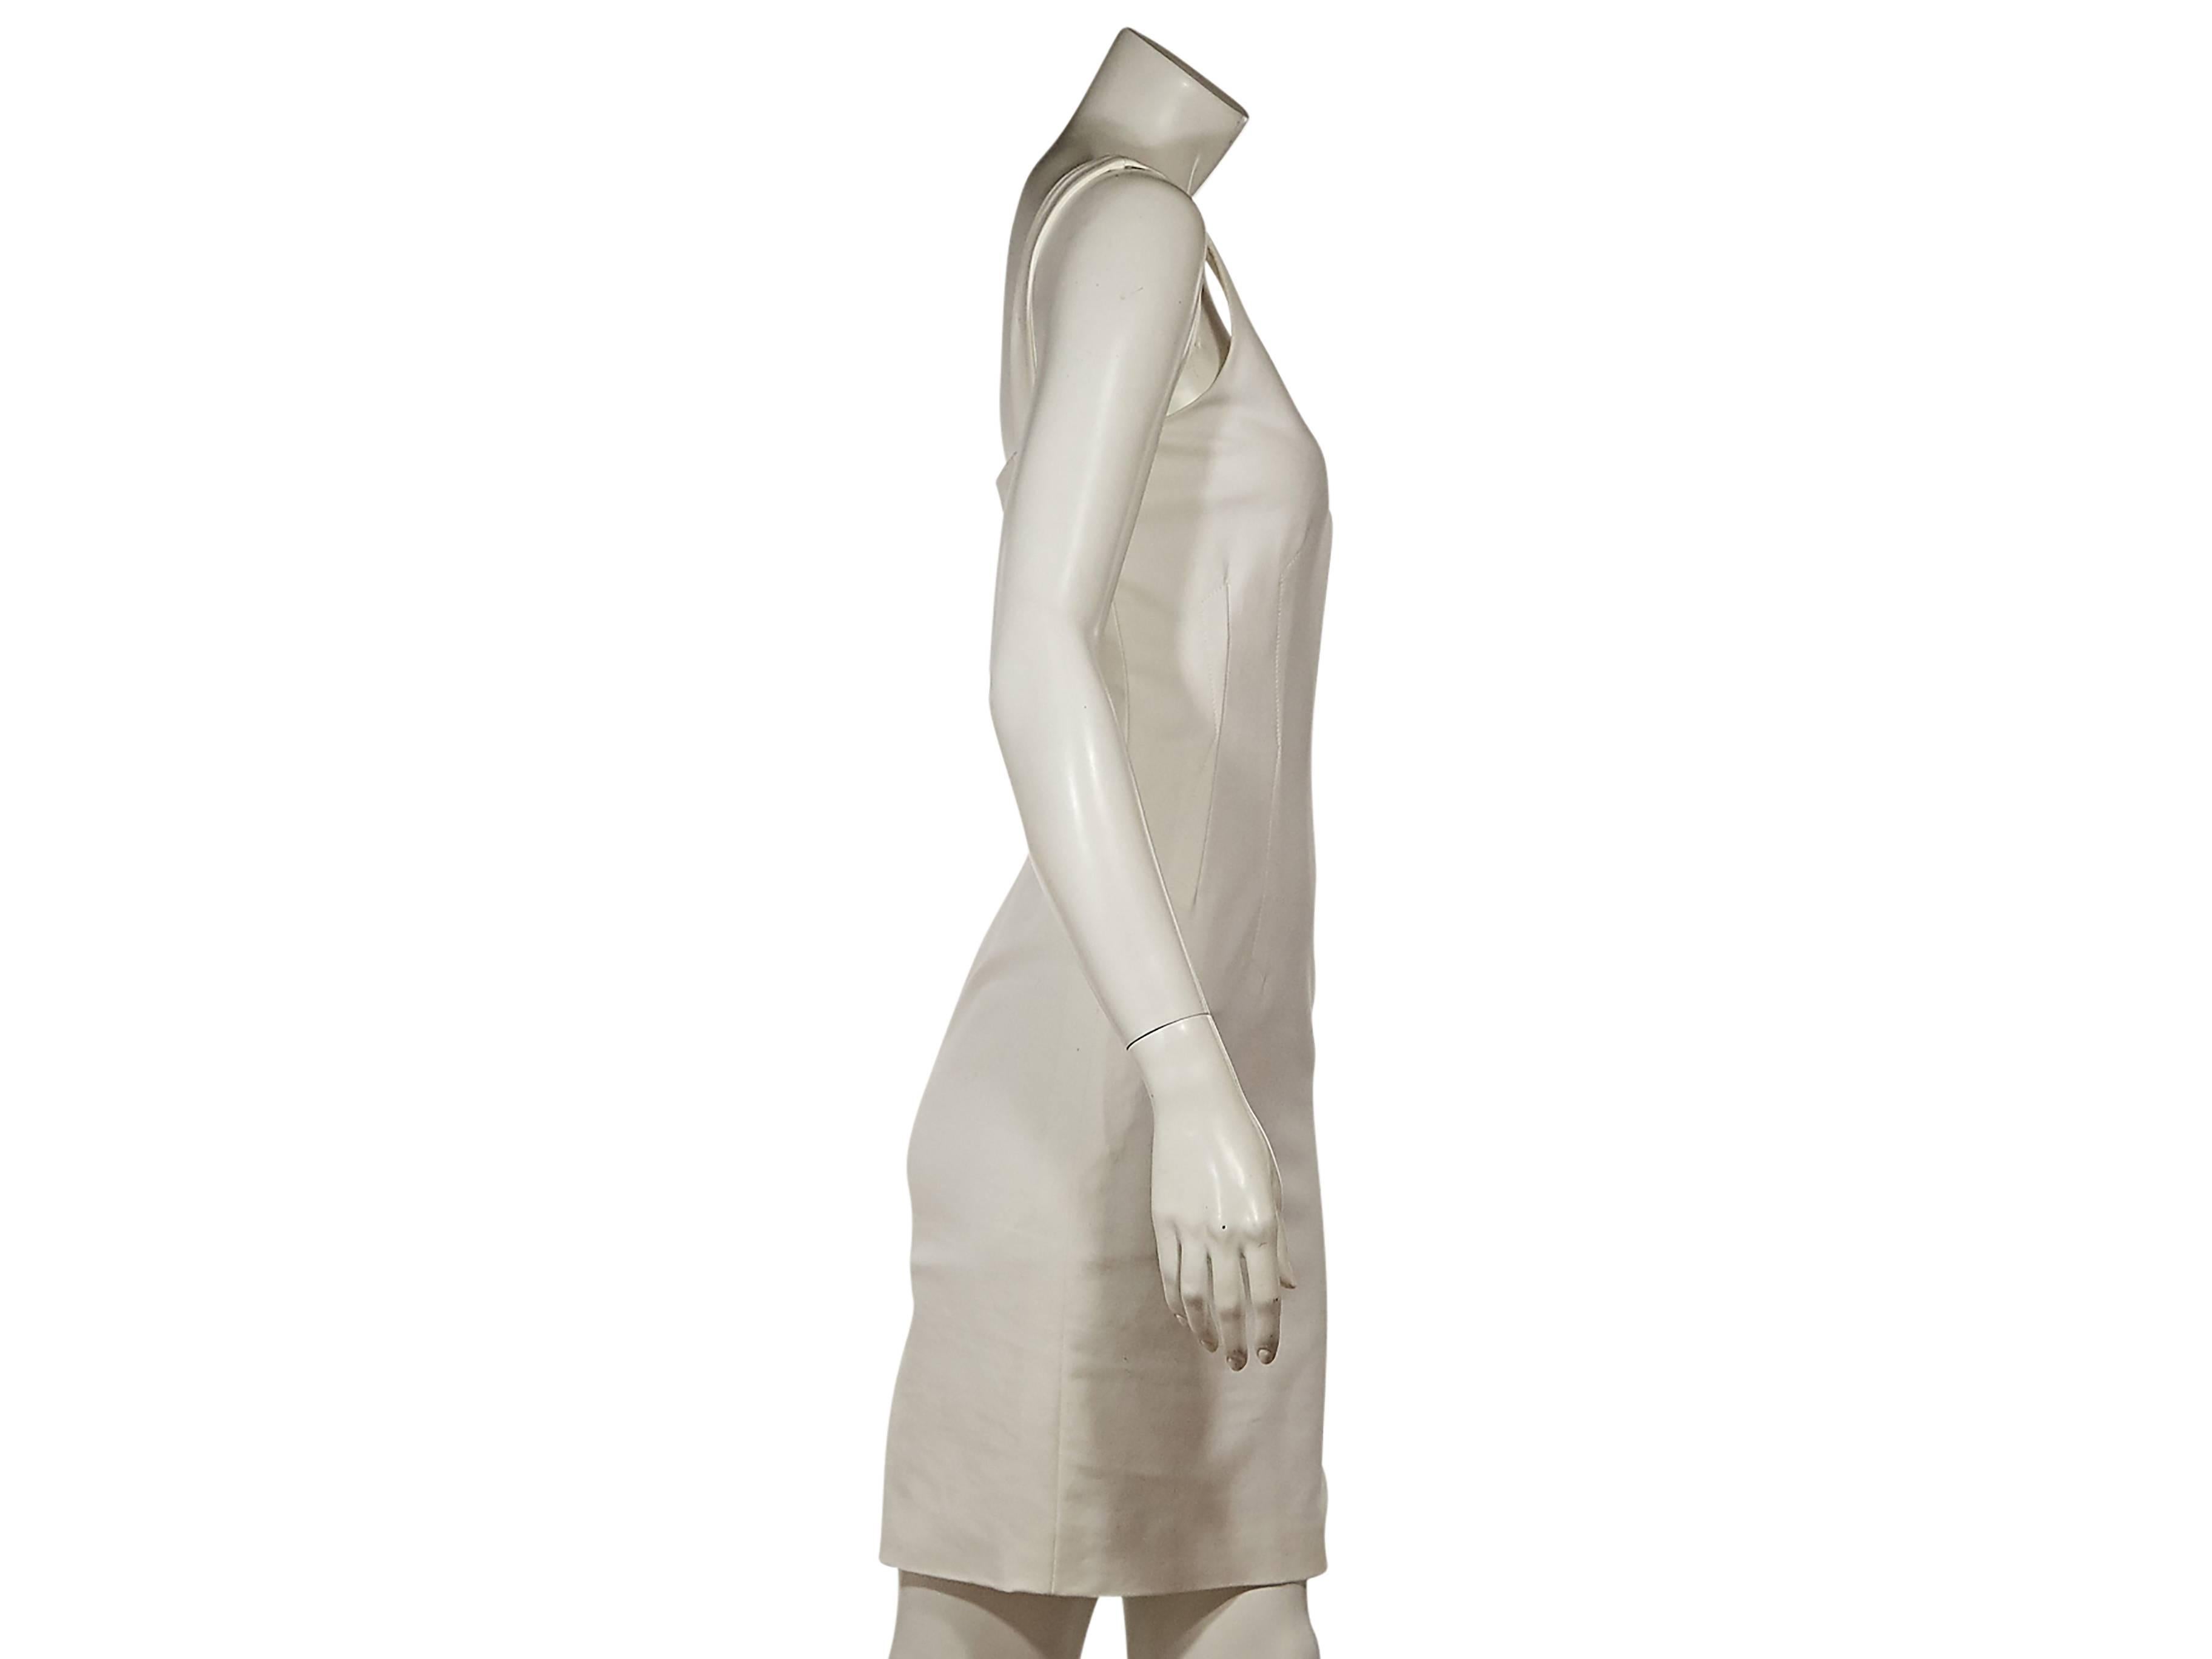 Product details:  White cotton sheath dress by Versace.  Side and back seams create a flattering silhouette.  Scoopneck.  Sleeveless.  Concealed back zip closure.  Back hem vent. 
Condition: Excellent.  